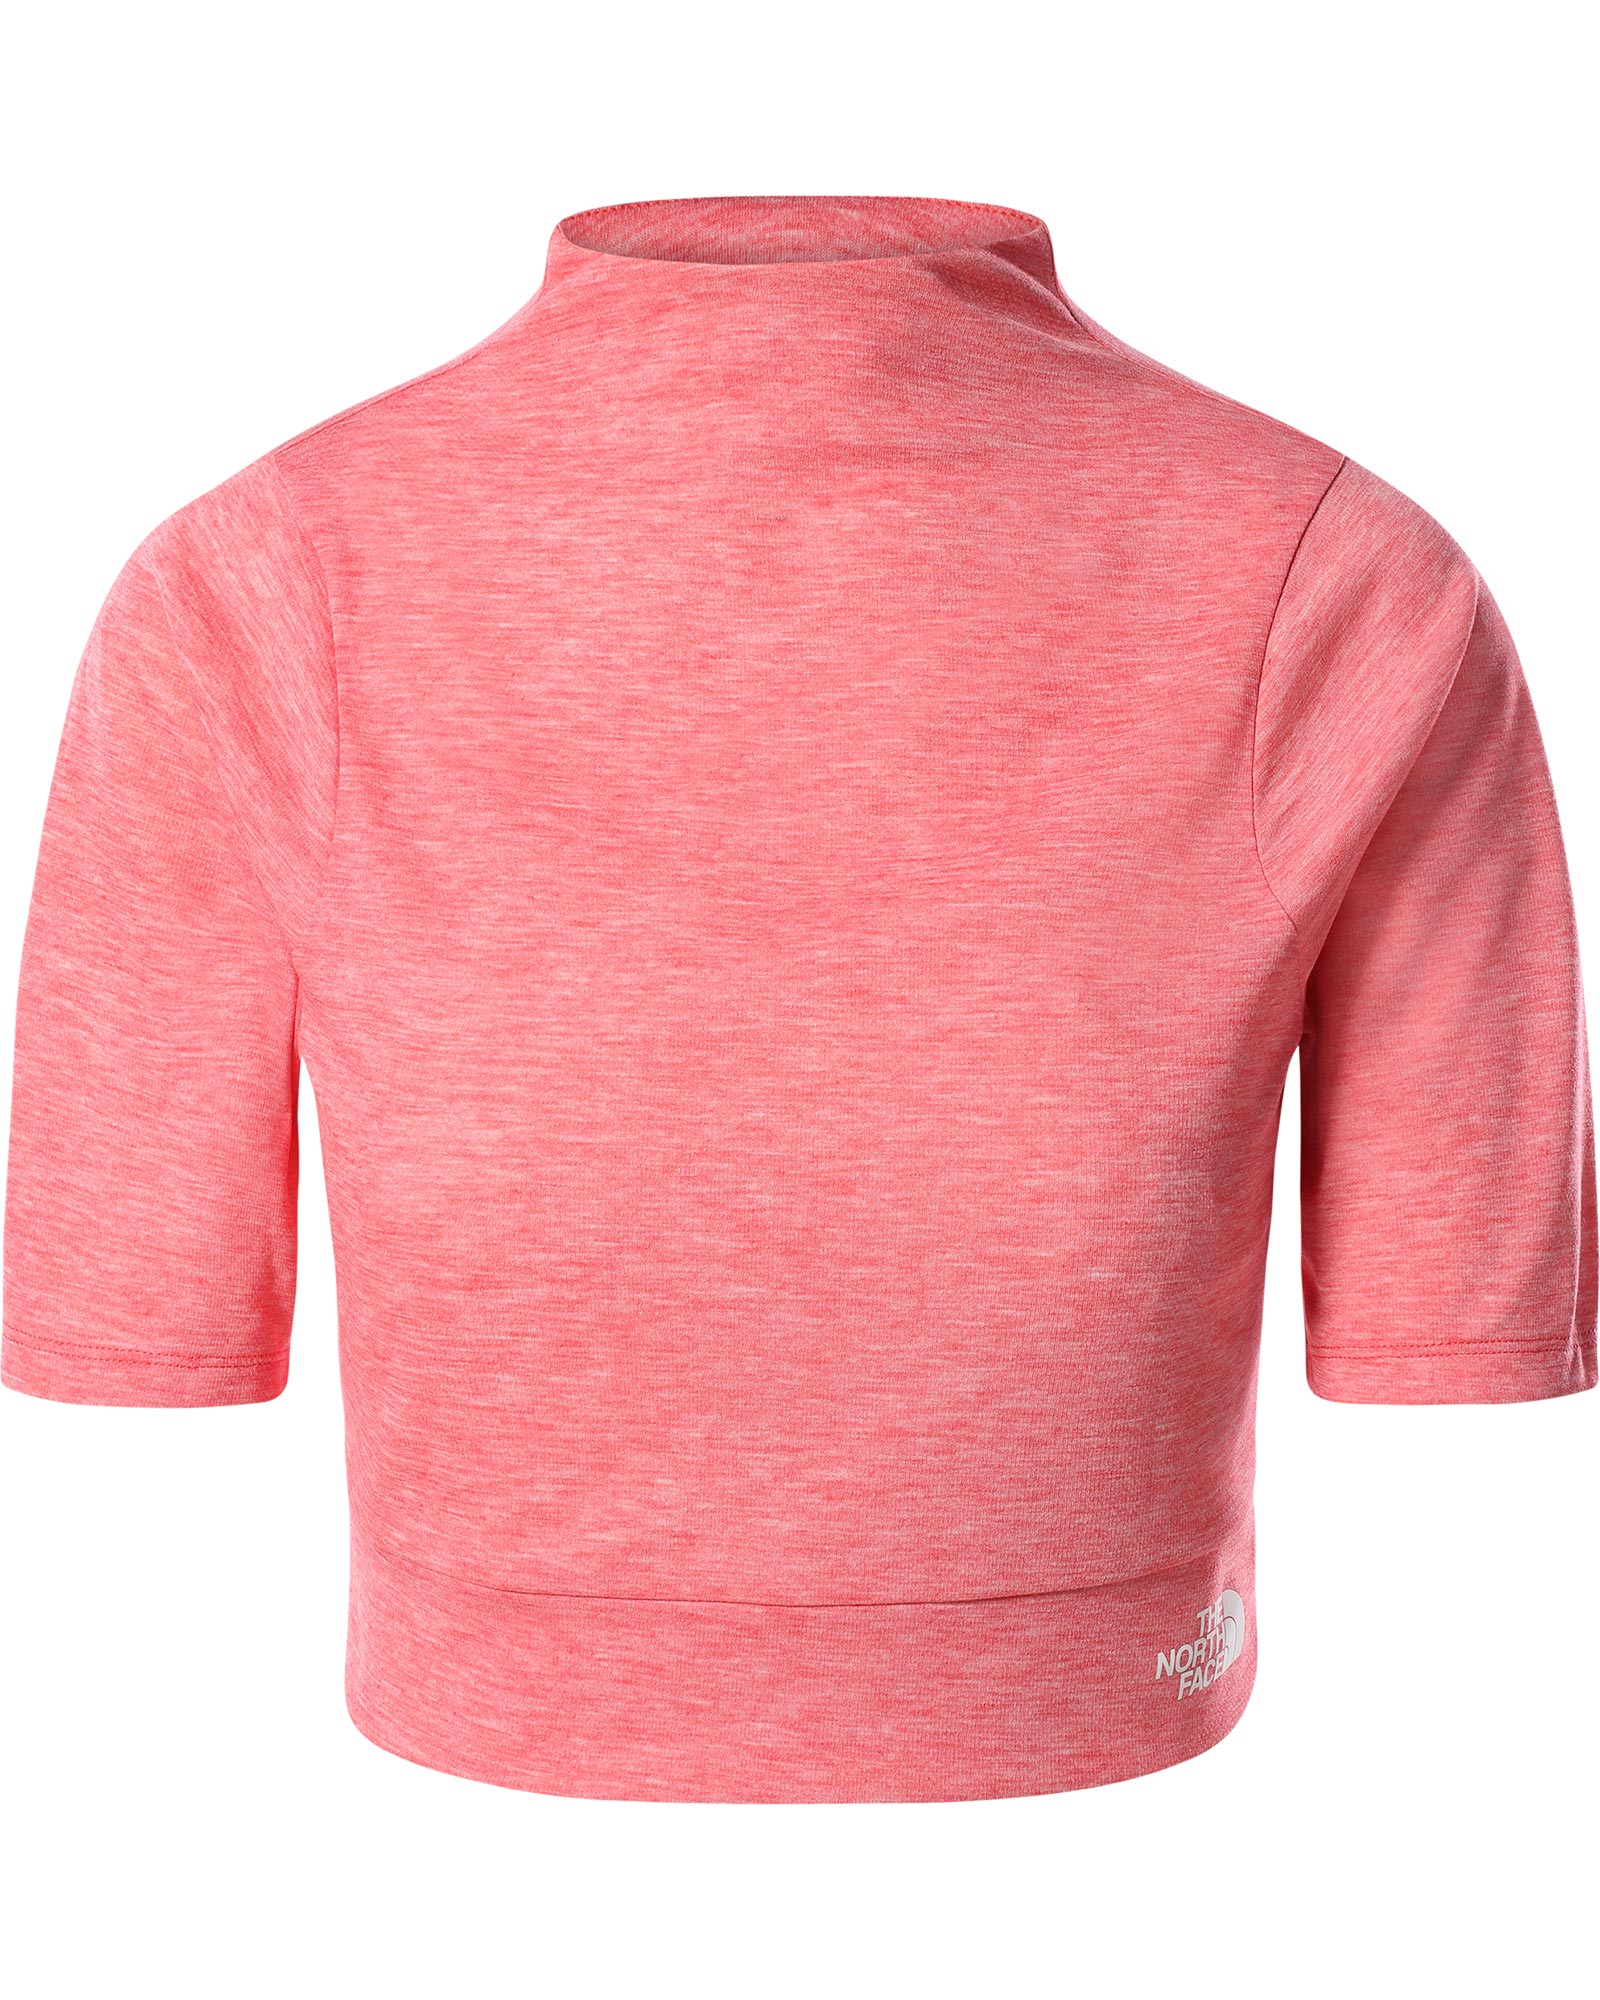 The North Face Vyrtue Women’s Crop Top - Horizon Red Heather M